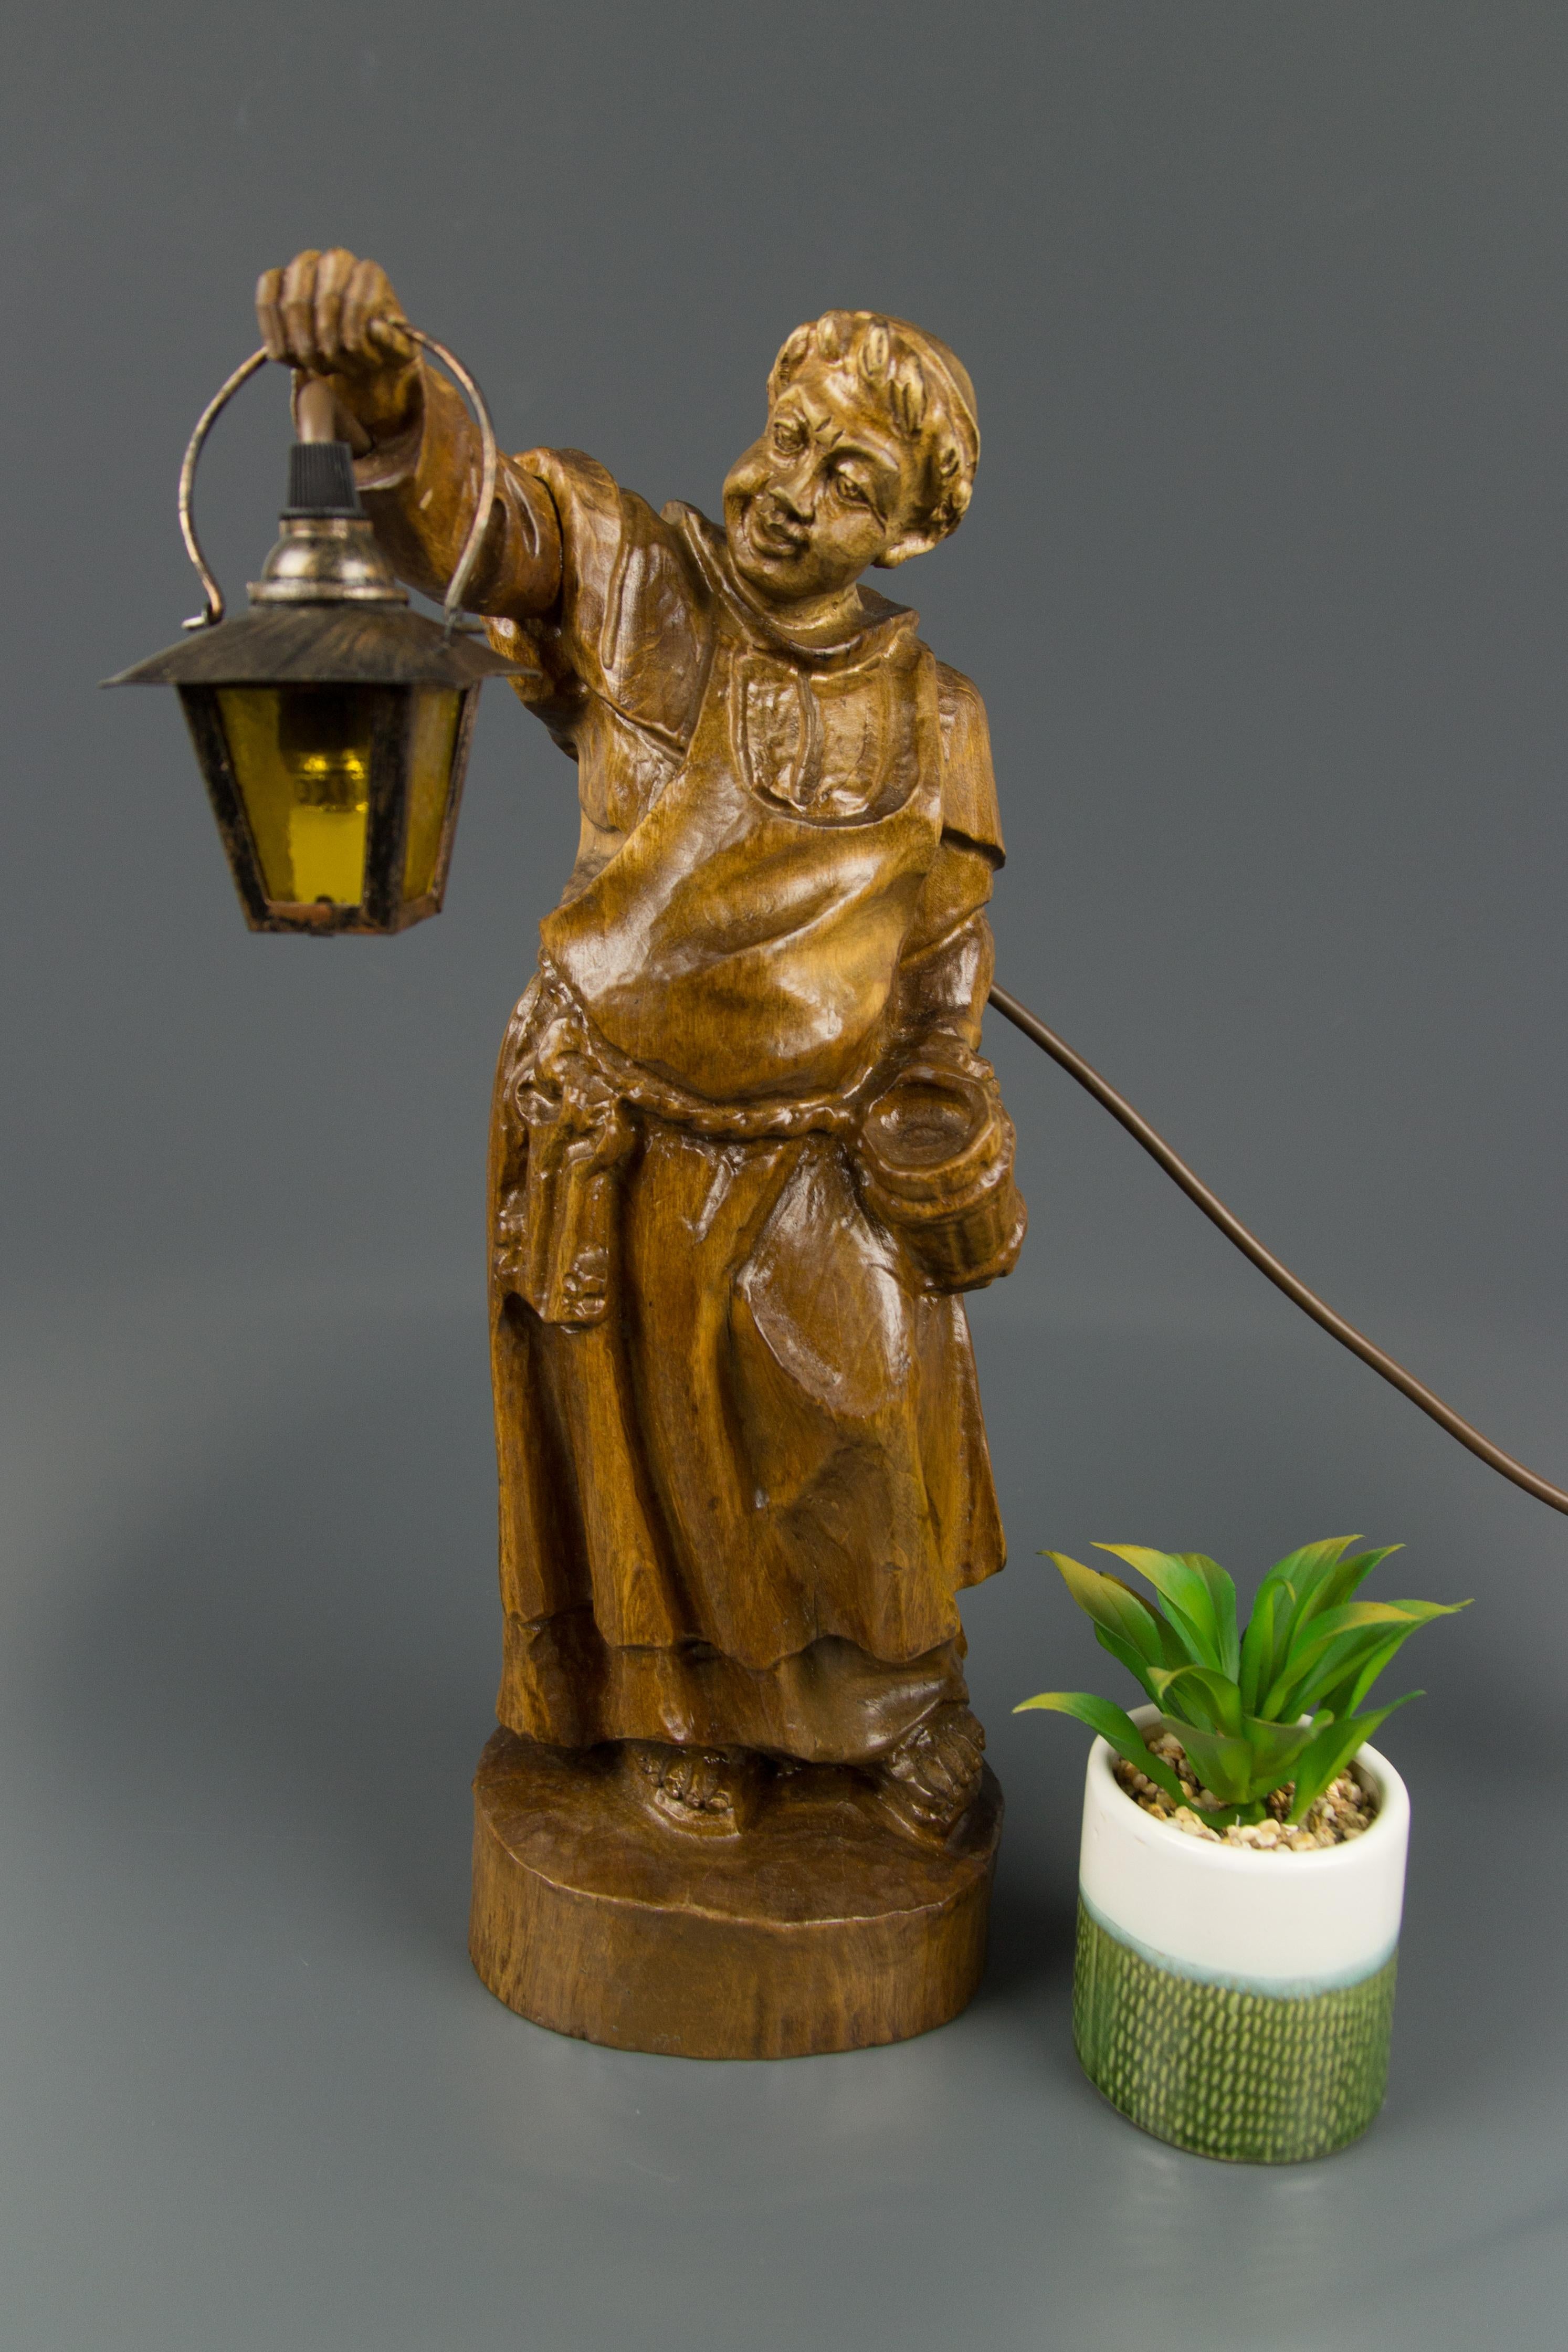 German Hand Carved Wooden Sculpture Figurative Lamp Monk with Lantern 2